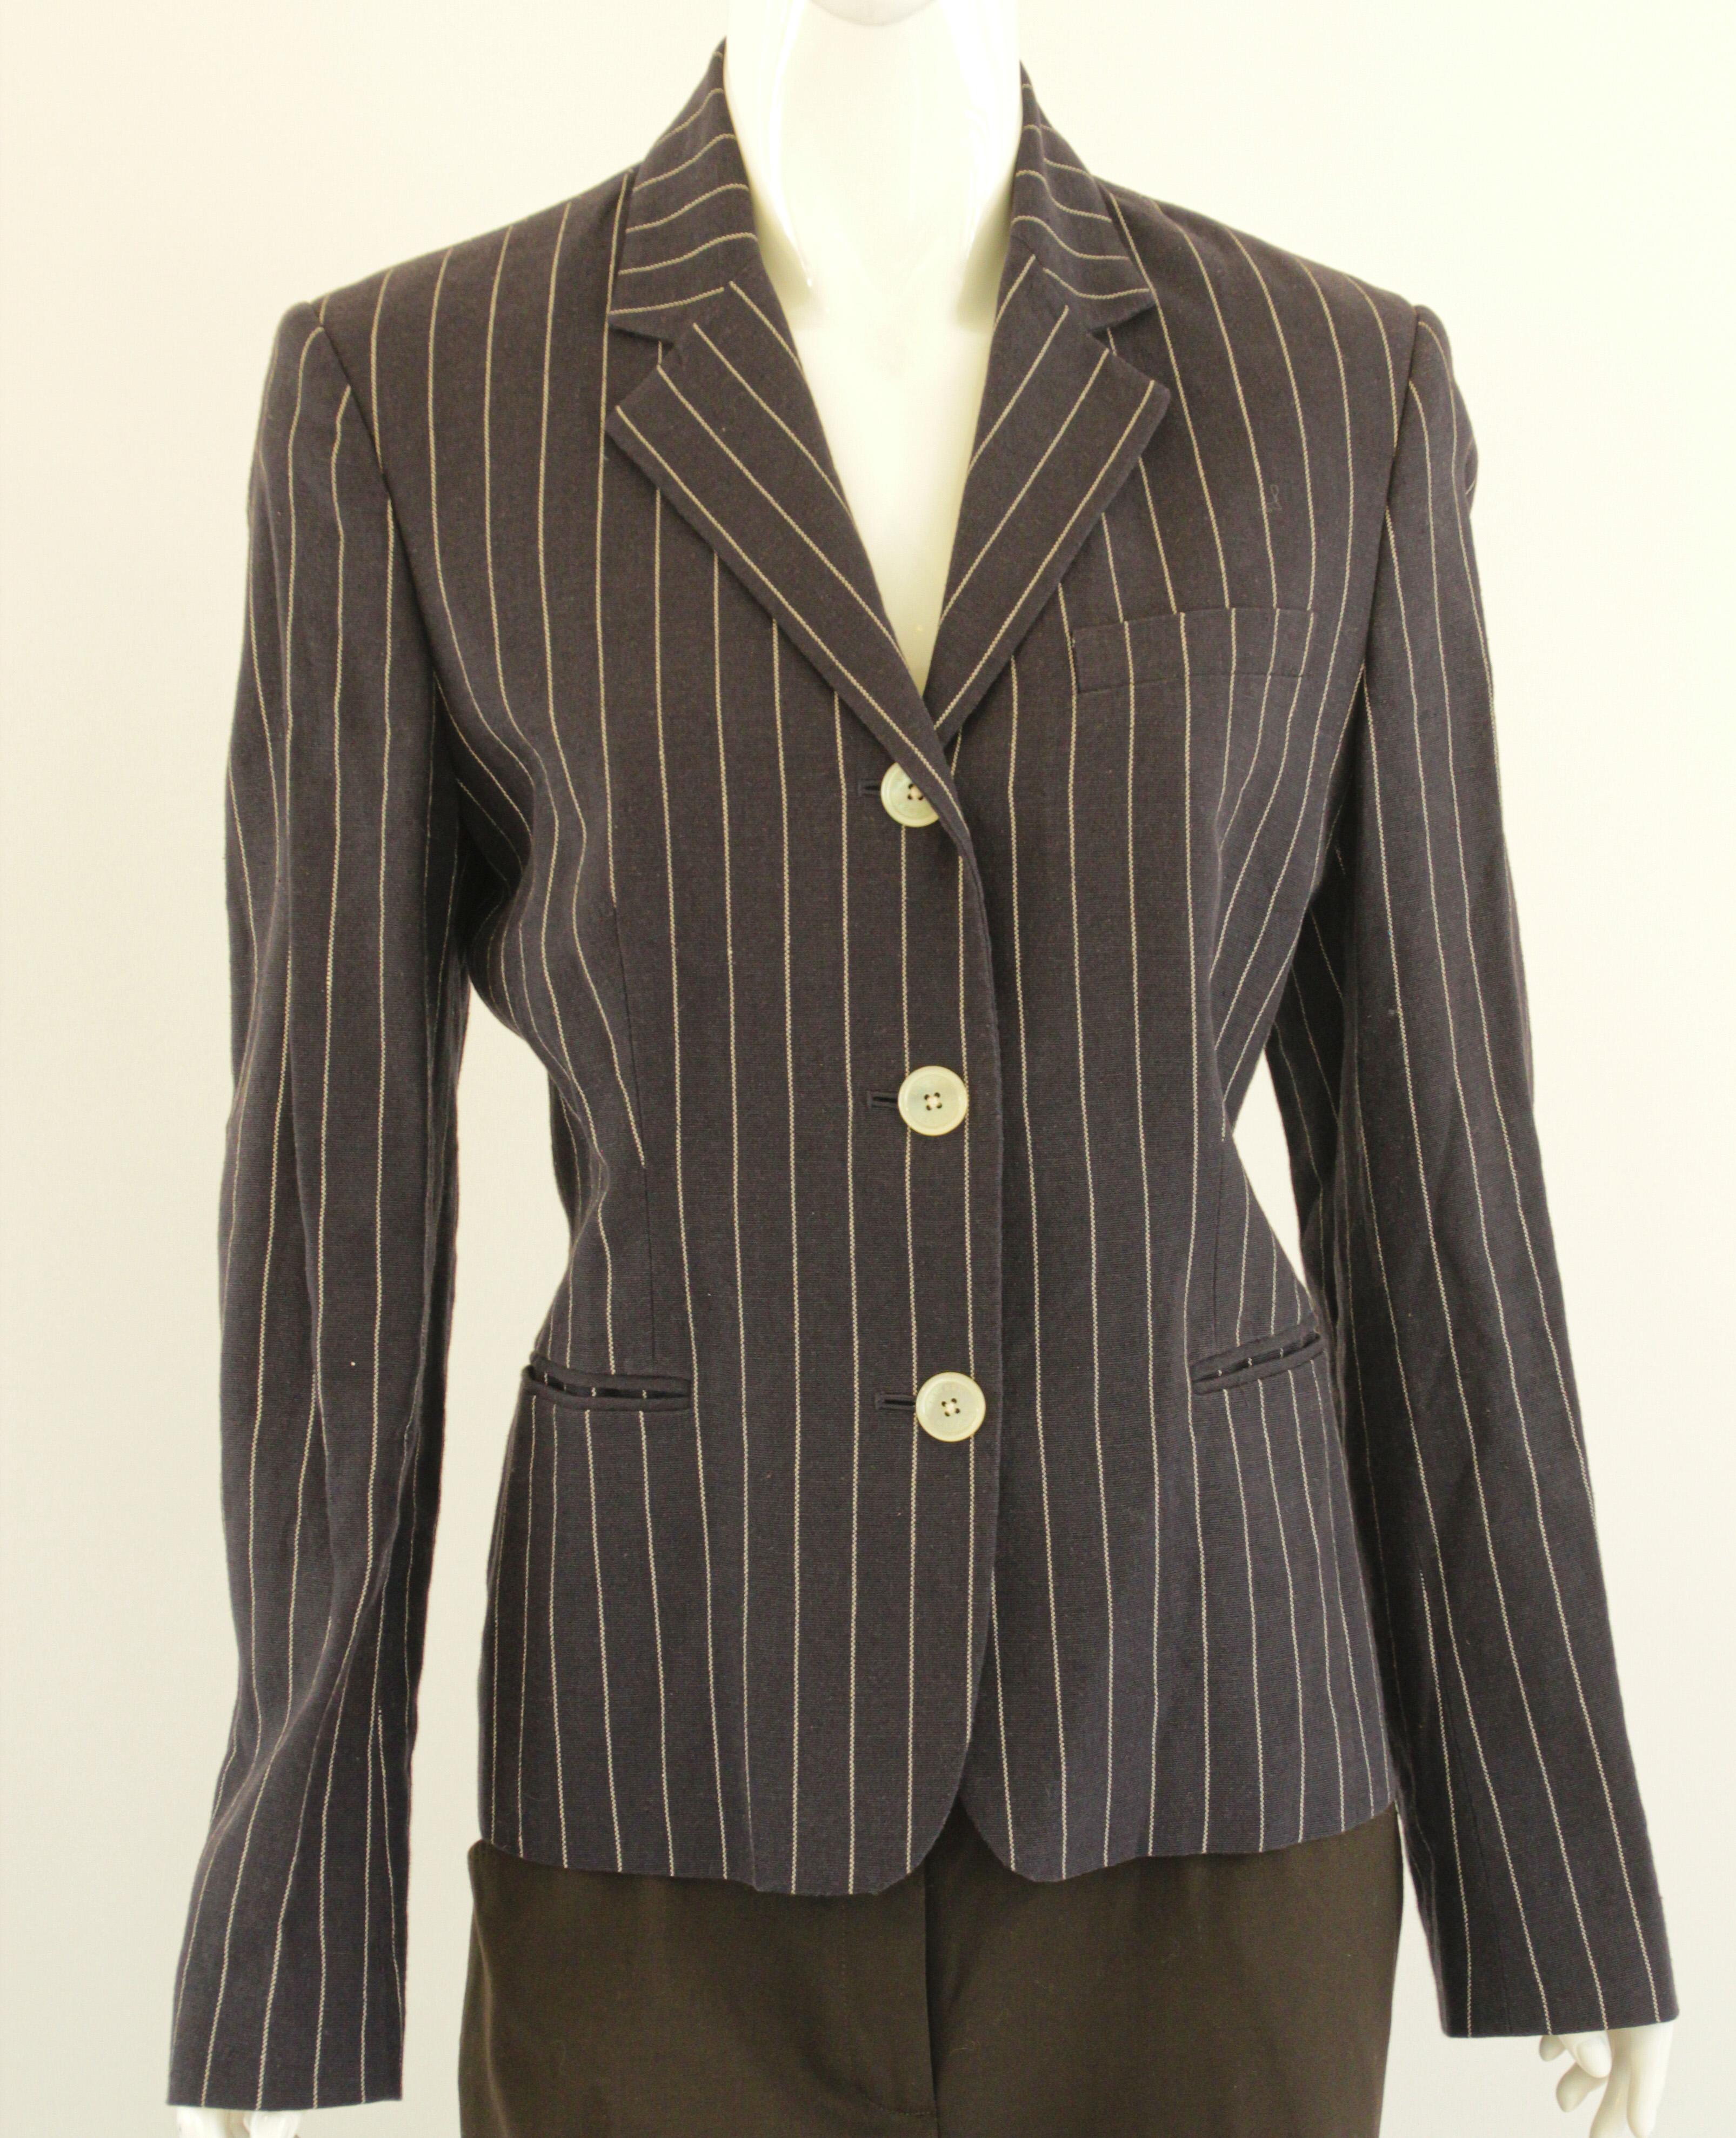 Ralph Lauren vintage black with white pinstripe blazer.
Women Ralph Lauren black button front jacket striped linen blend.
Ralph Lauren Green Label.
Pinstriped, lapel collar, single-breasted , long sleeves, with shoulder pad, fully lined, 3 buttons,